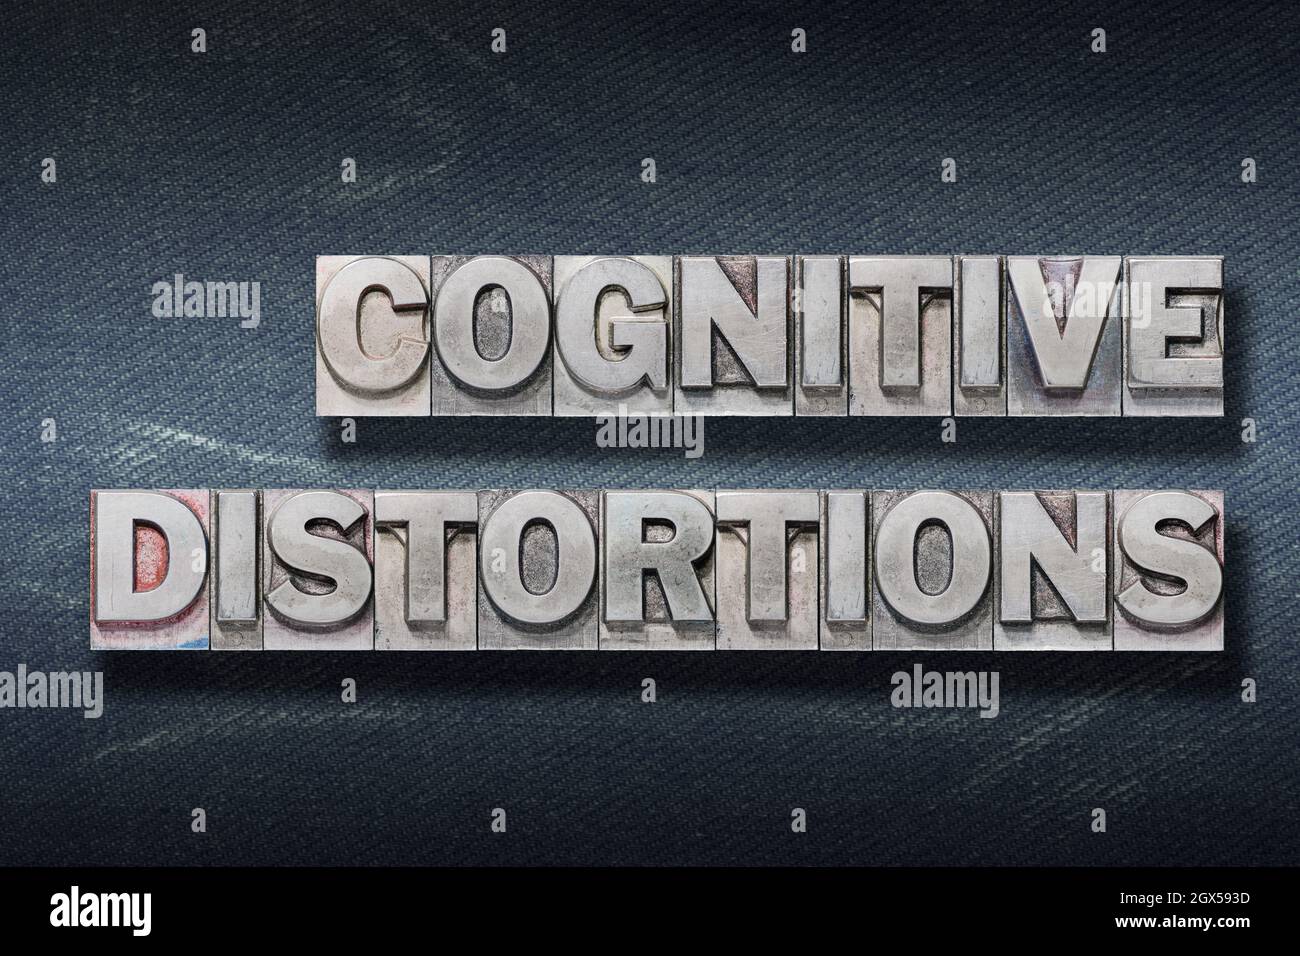 cognitive distortions phrase made from metallic letterpress on dark jeans background Stock Photo